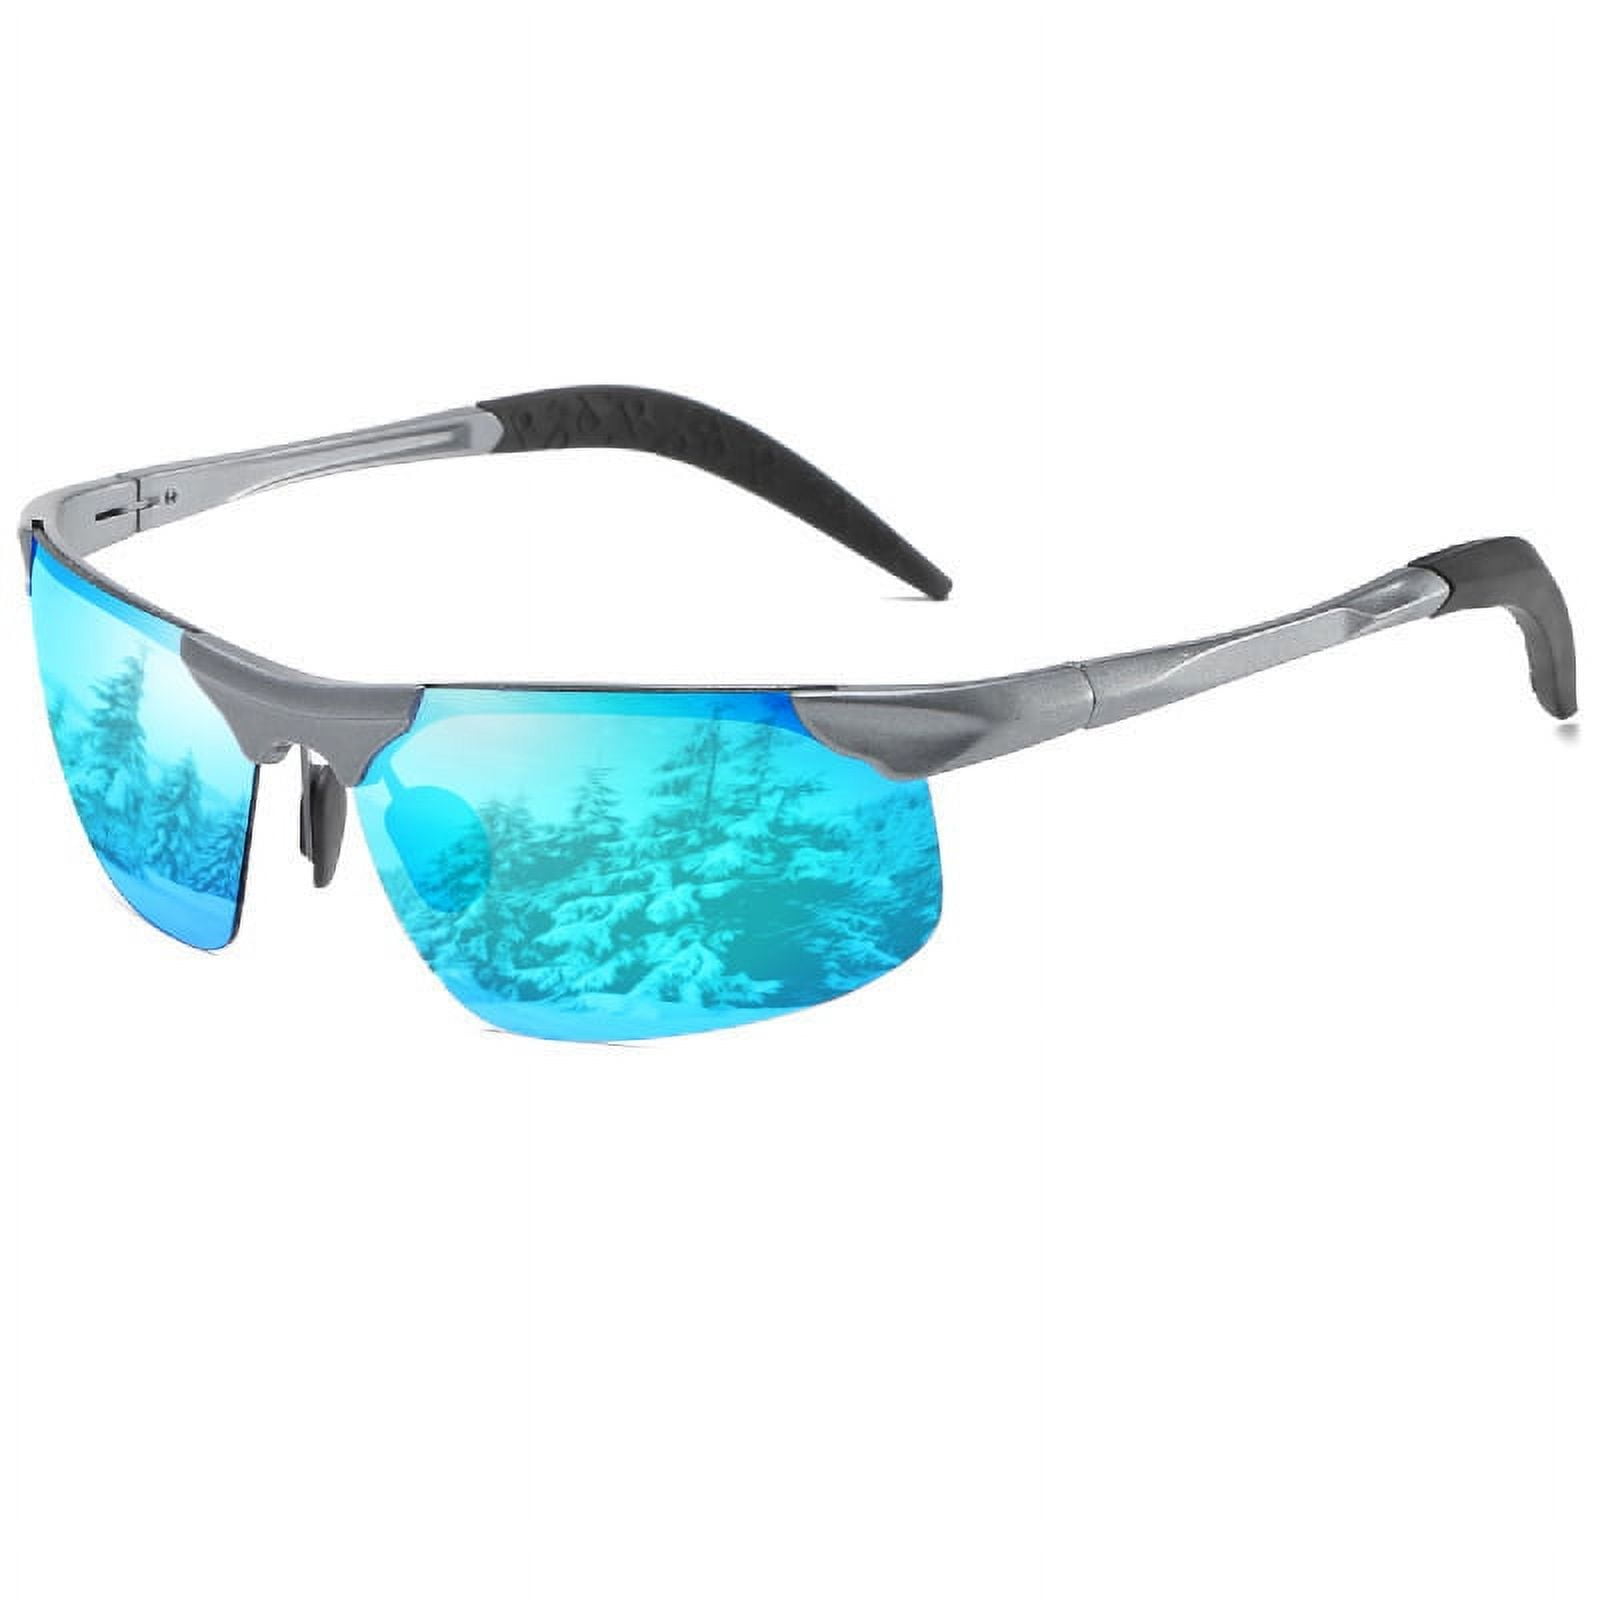 AABV Polarized Sports Sunglasses for Men Women Cycling Running Fishing  Glasses TR90 Unbreakable Frame UV Protection 